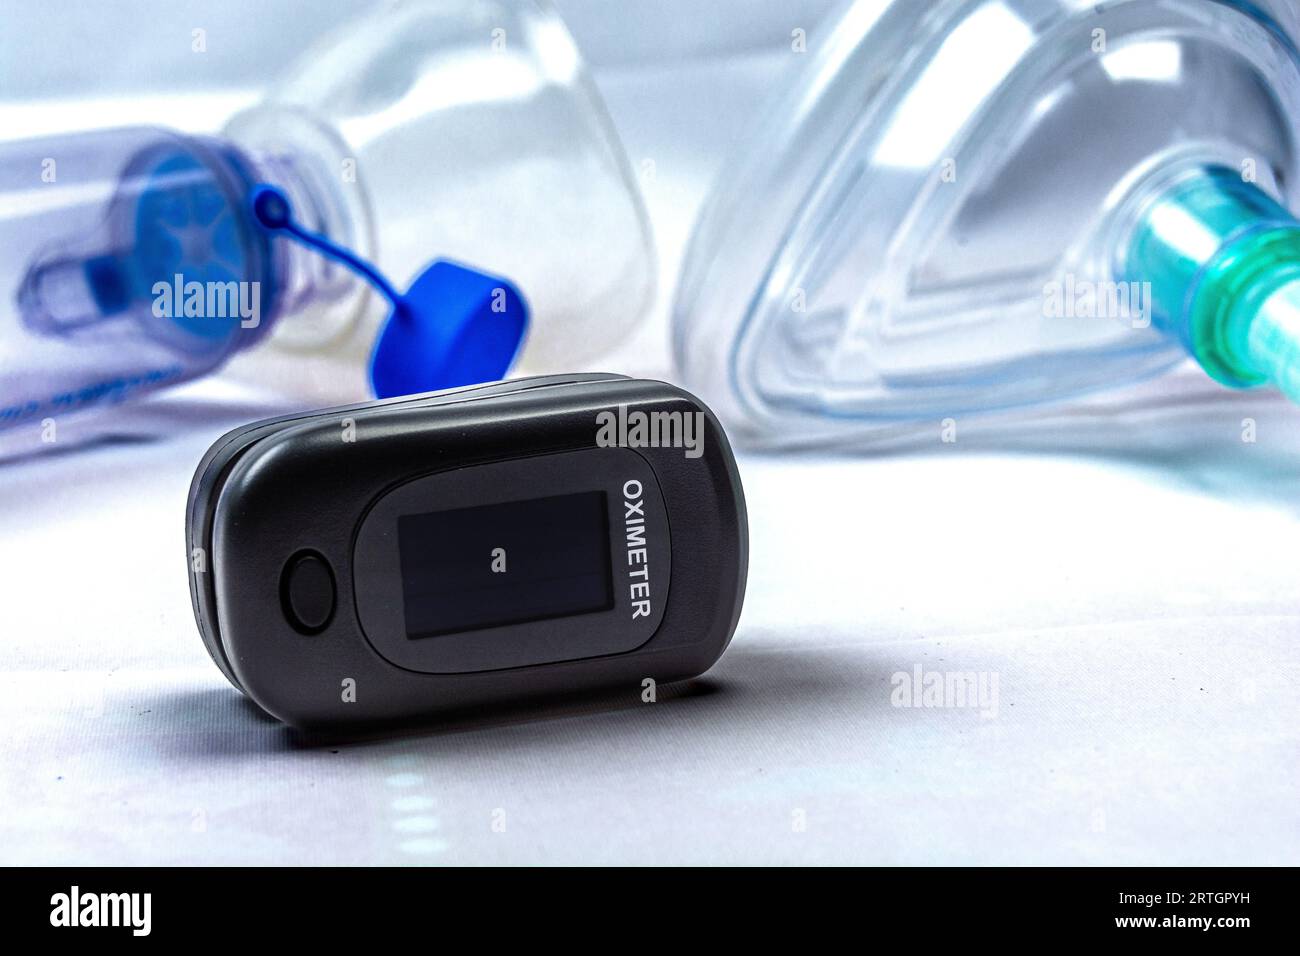 Digital pulse oximeter photographed on a white background in high key, next to an inhaler mask. Medical instruments. Stock Photo